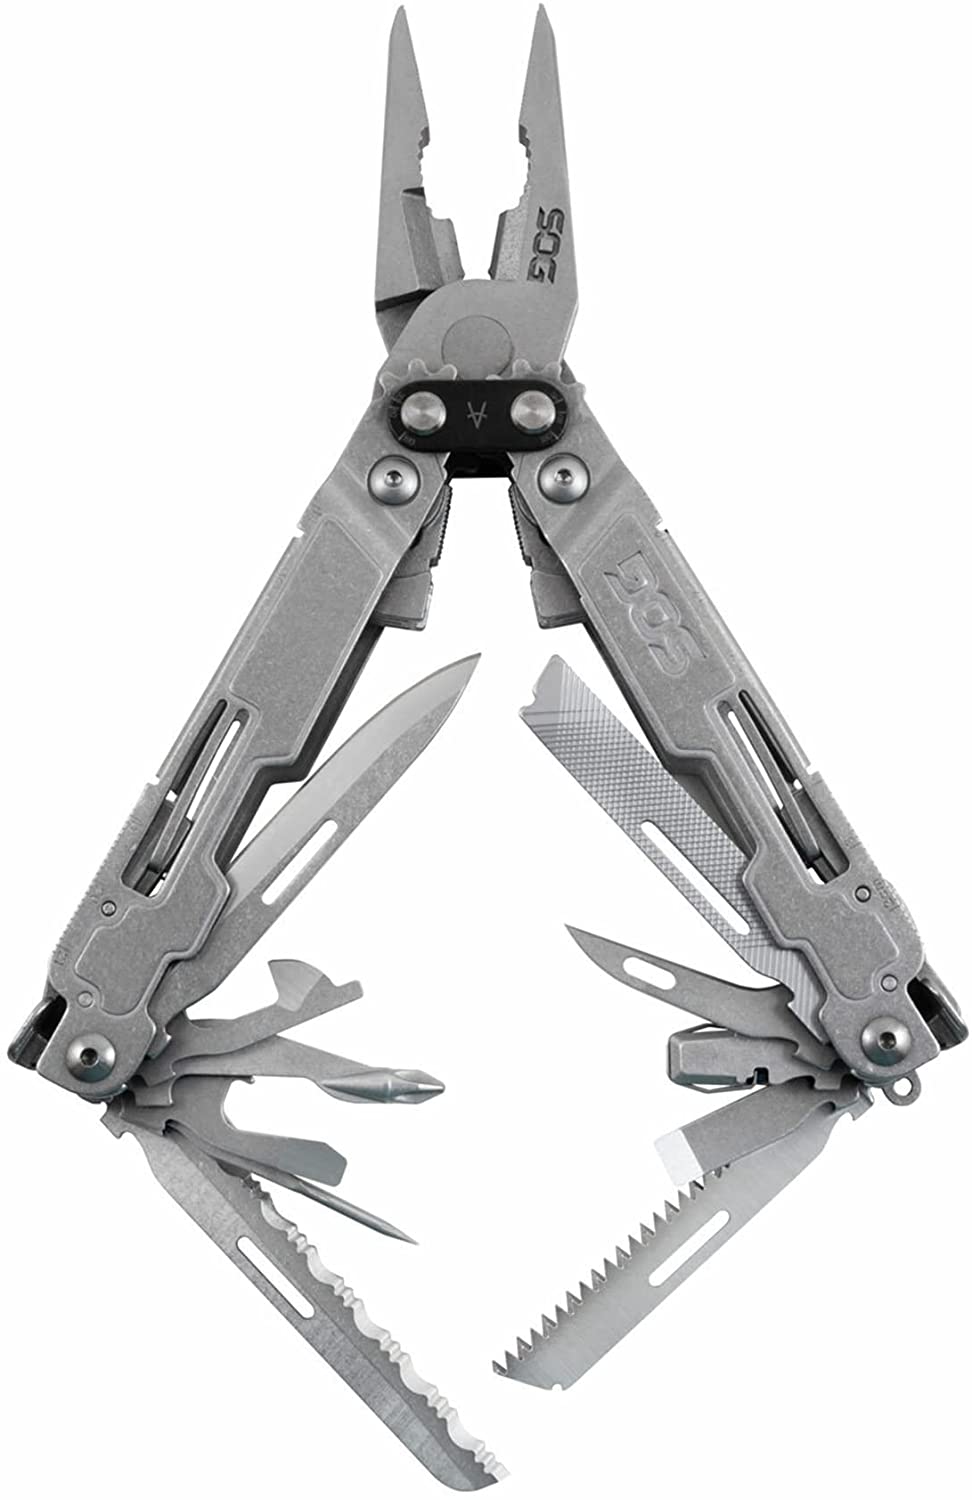 SOG - PowerAccess Deluxe EDC Utility Multi-Tool, 21 Lightweight Specialty Tools, Stainless Steel Construction w/ Nylon Sheath